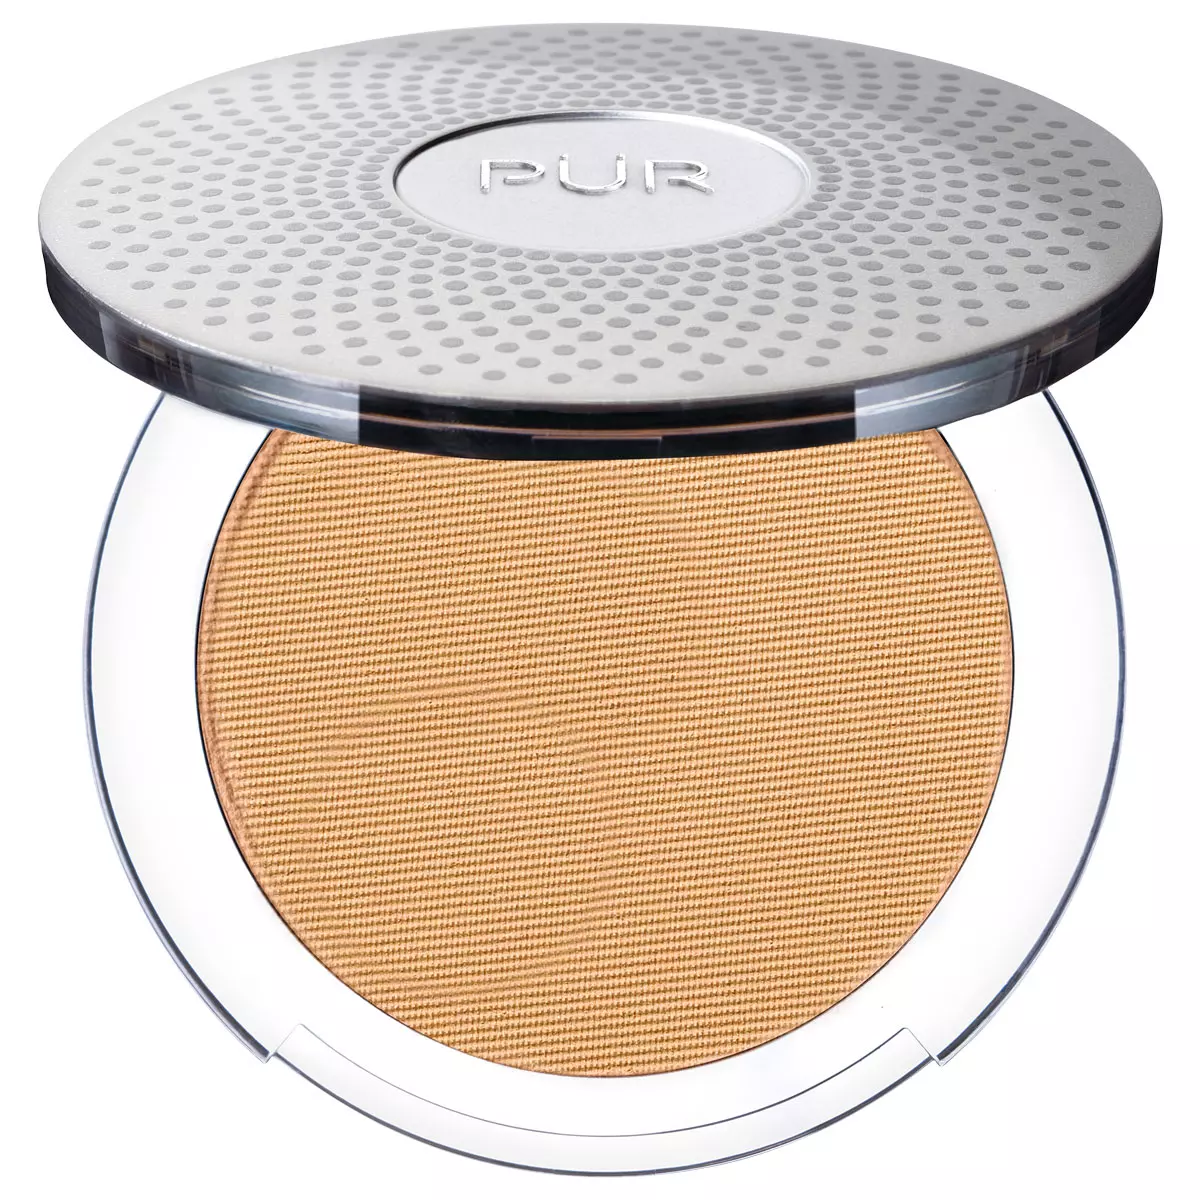 PÜR Cosmetics 4-In-1 Pressed Mineral Makeup Foundation – Bisque